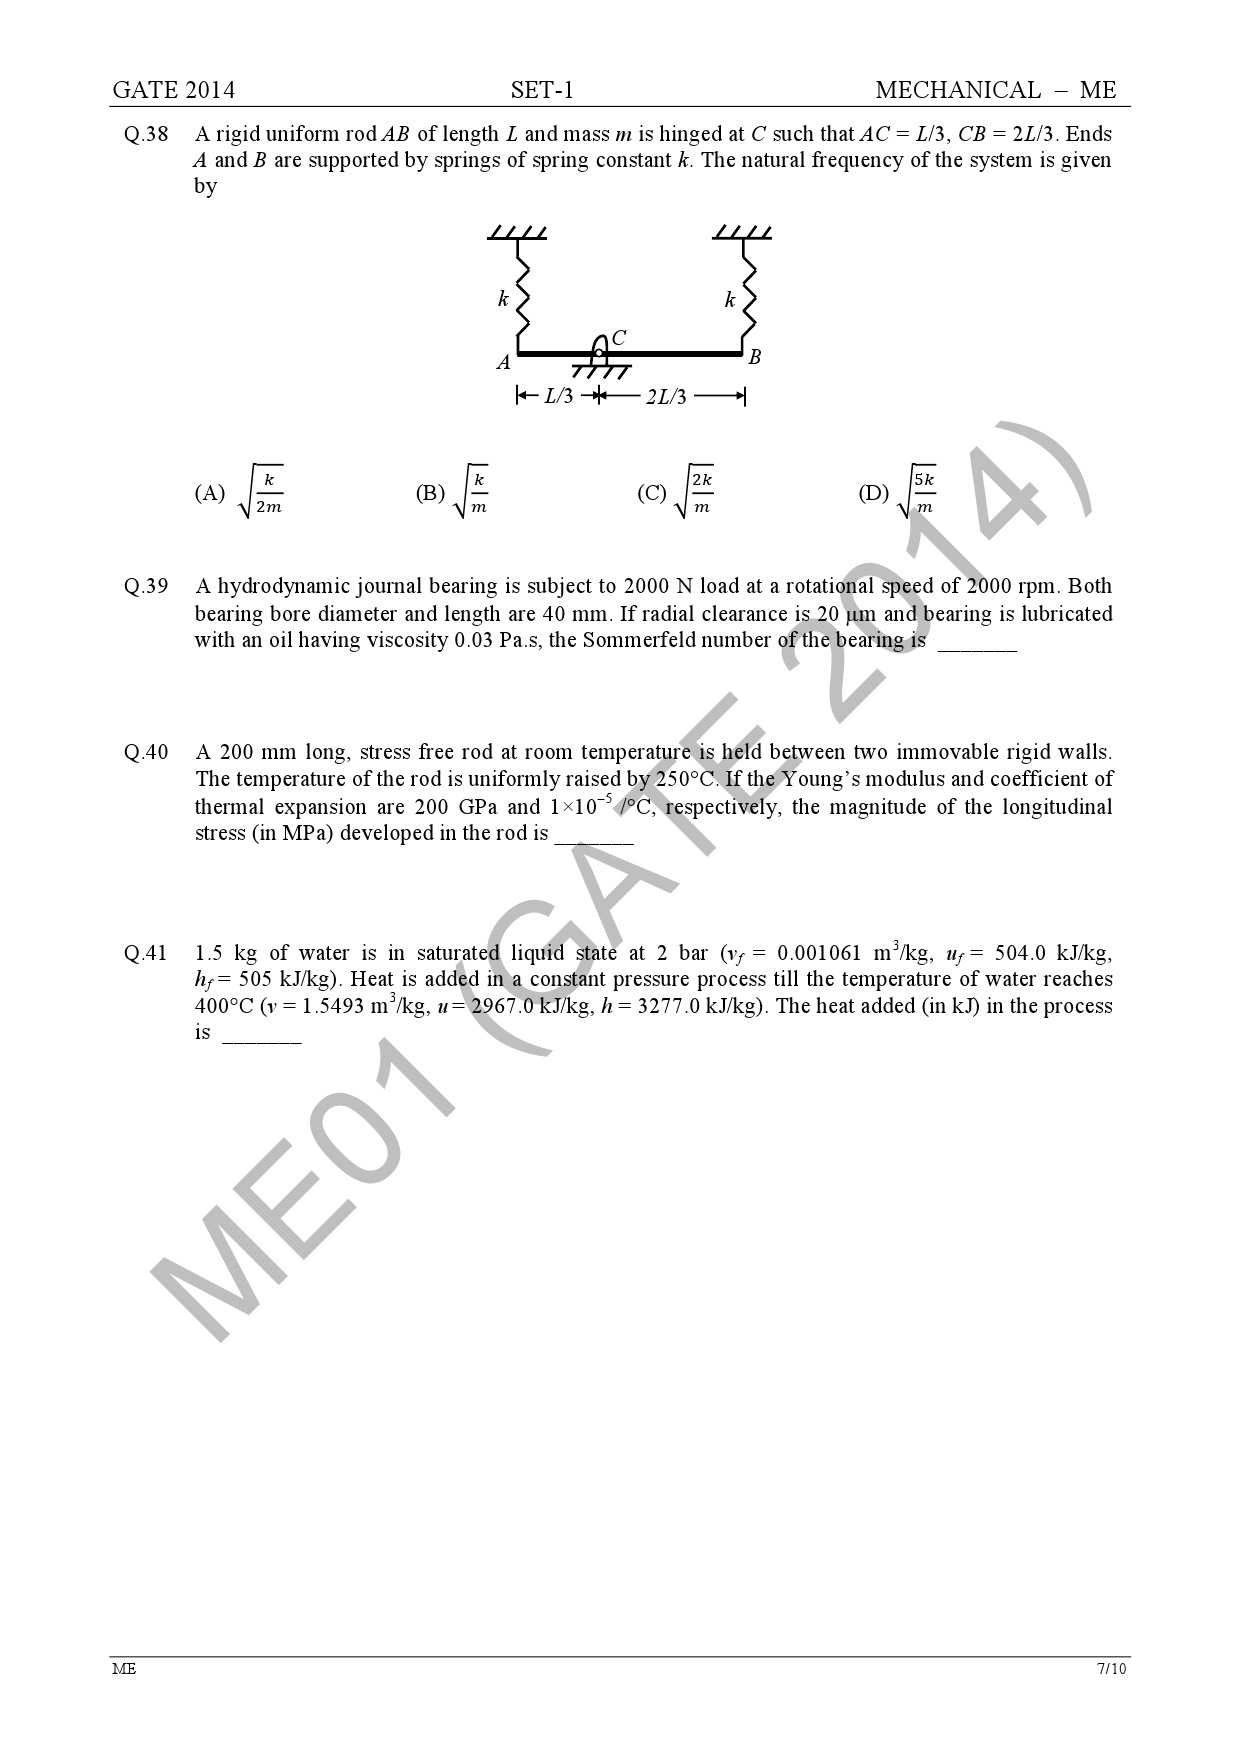 GATE Exam Question Paper 2014 Mechanical Engineering Set 1 13